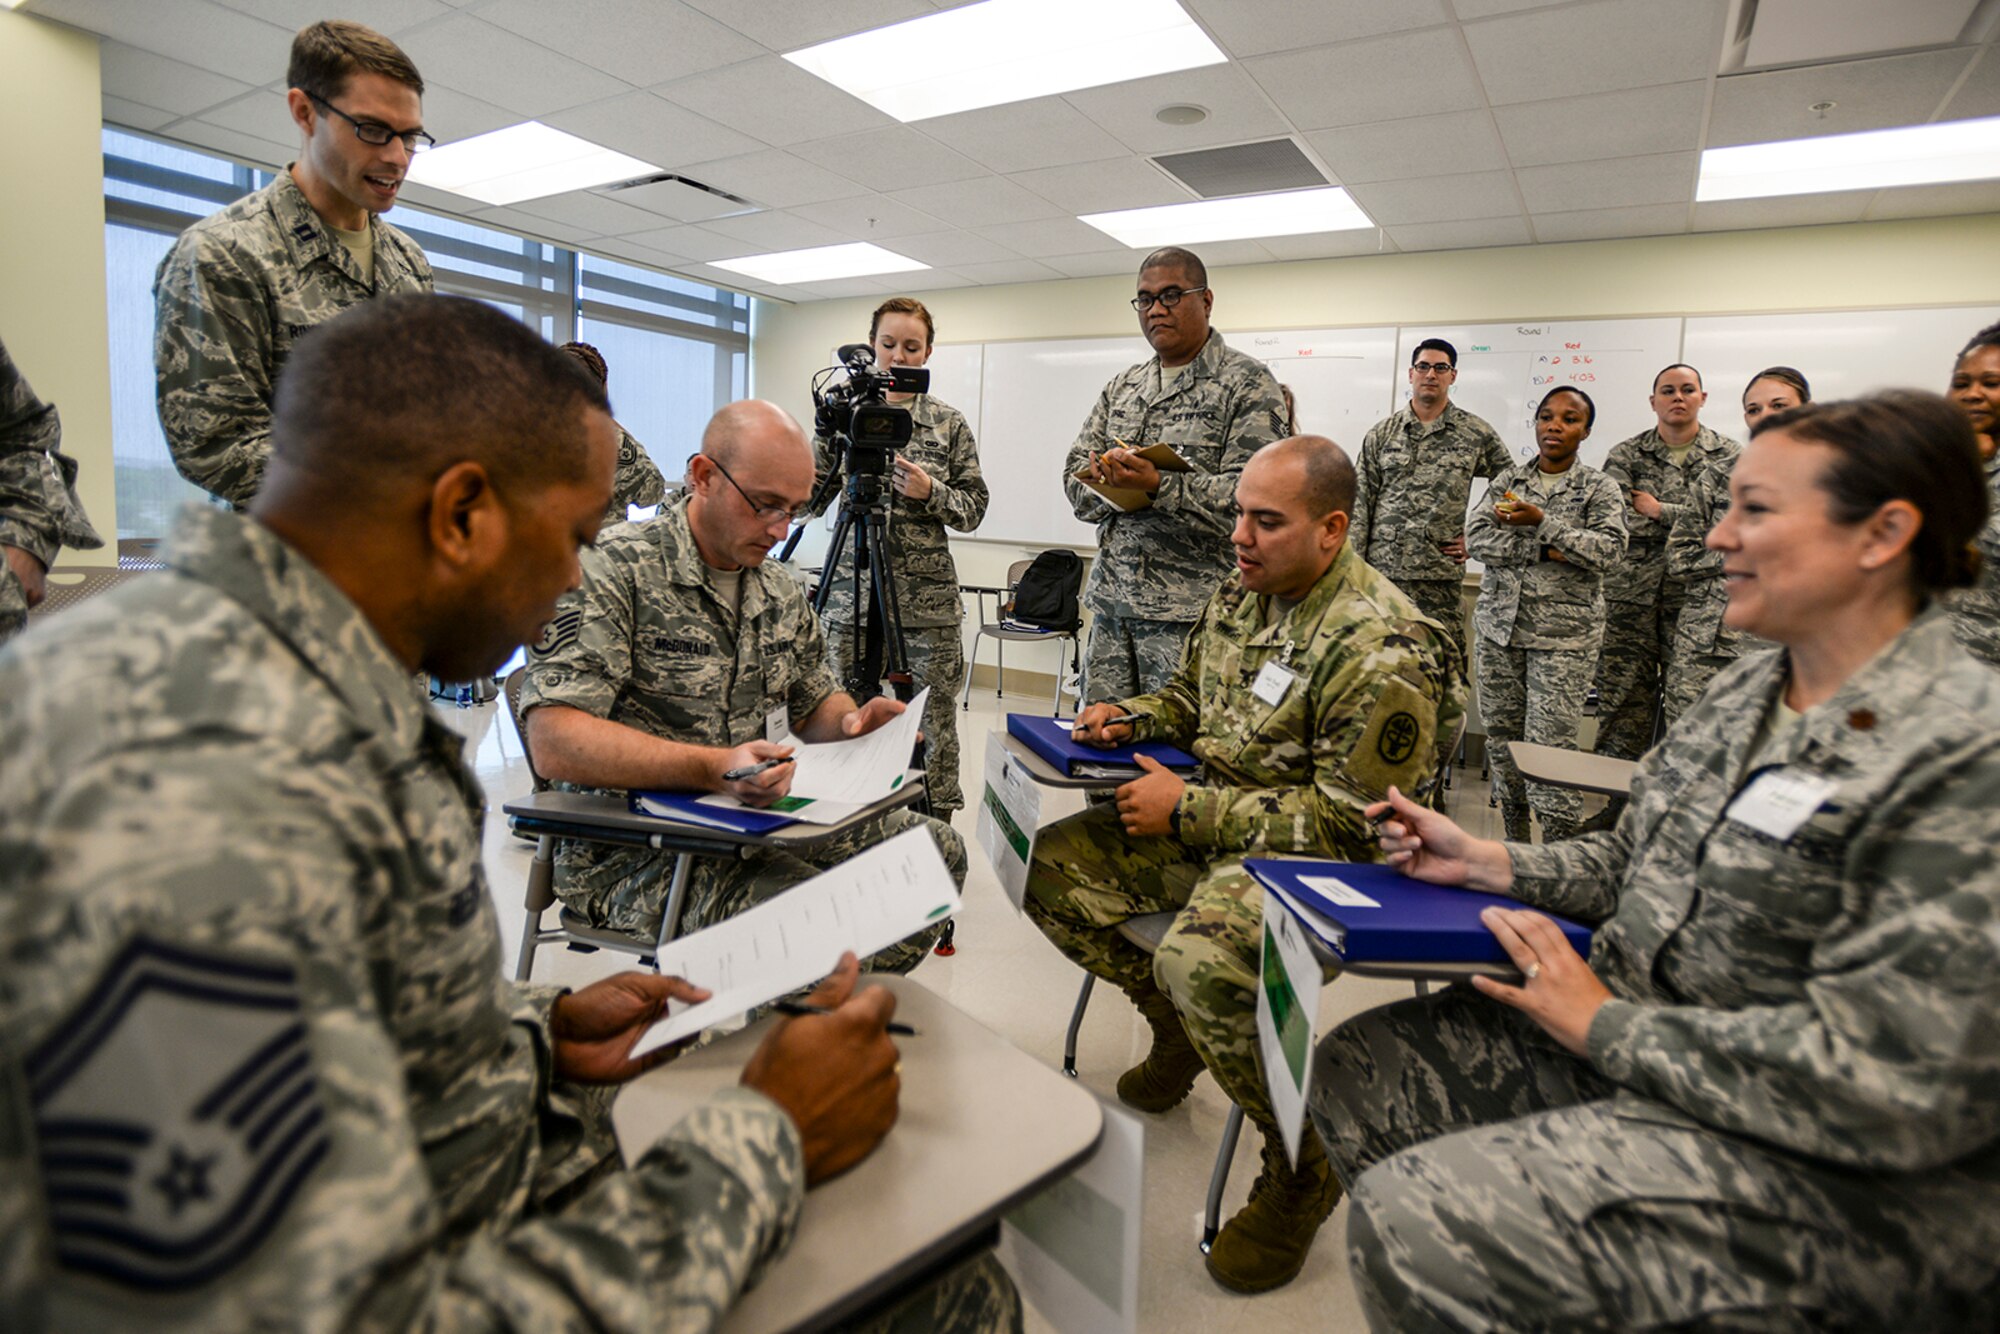 Students simulate checking in and tracking patient movements in a mock clinic during the Gateway Academy's "Seven Wastes" class April 26, 2016, at the San Antonio Military Medical Center on Joint Base San Antonio-Fort Sam Houston, Texas. The goal of the Seven Wastes class was to find ways to eliminate wasted time during appointments which would help enhance patient care. (Courtesy photo)